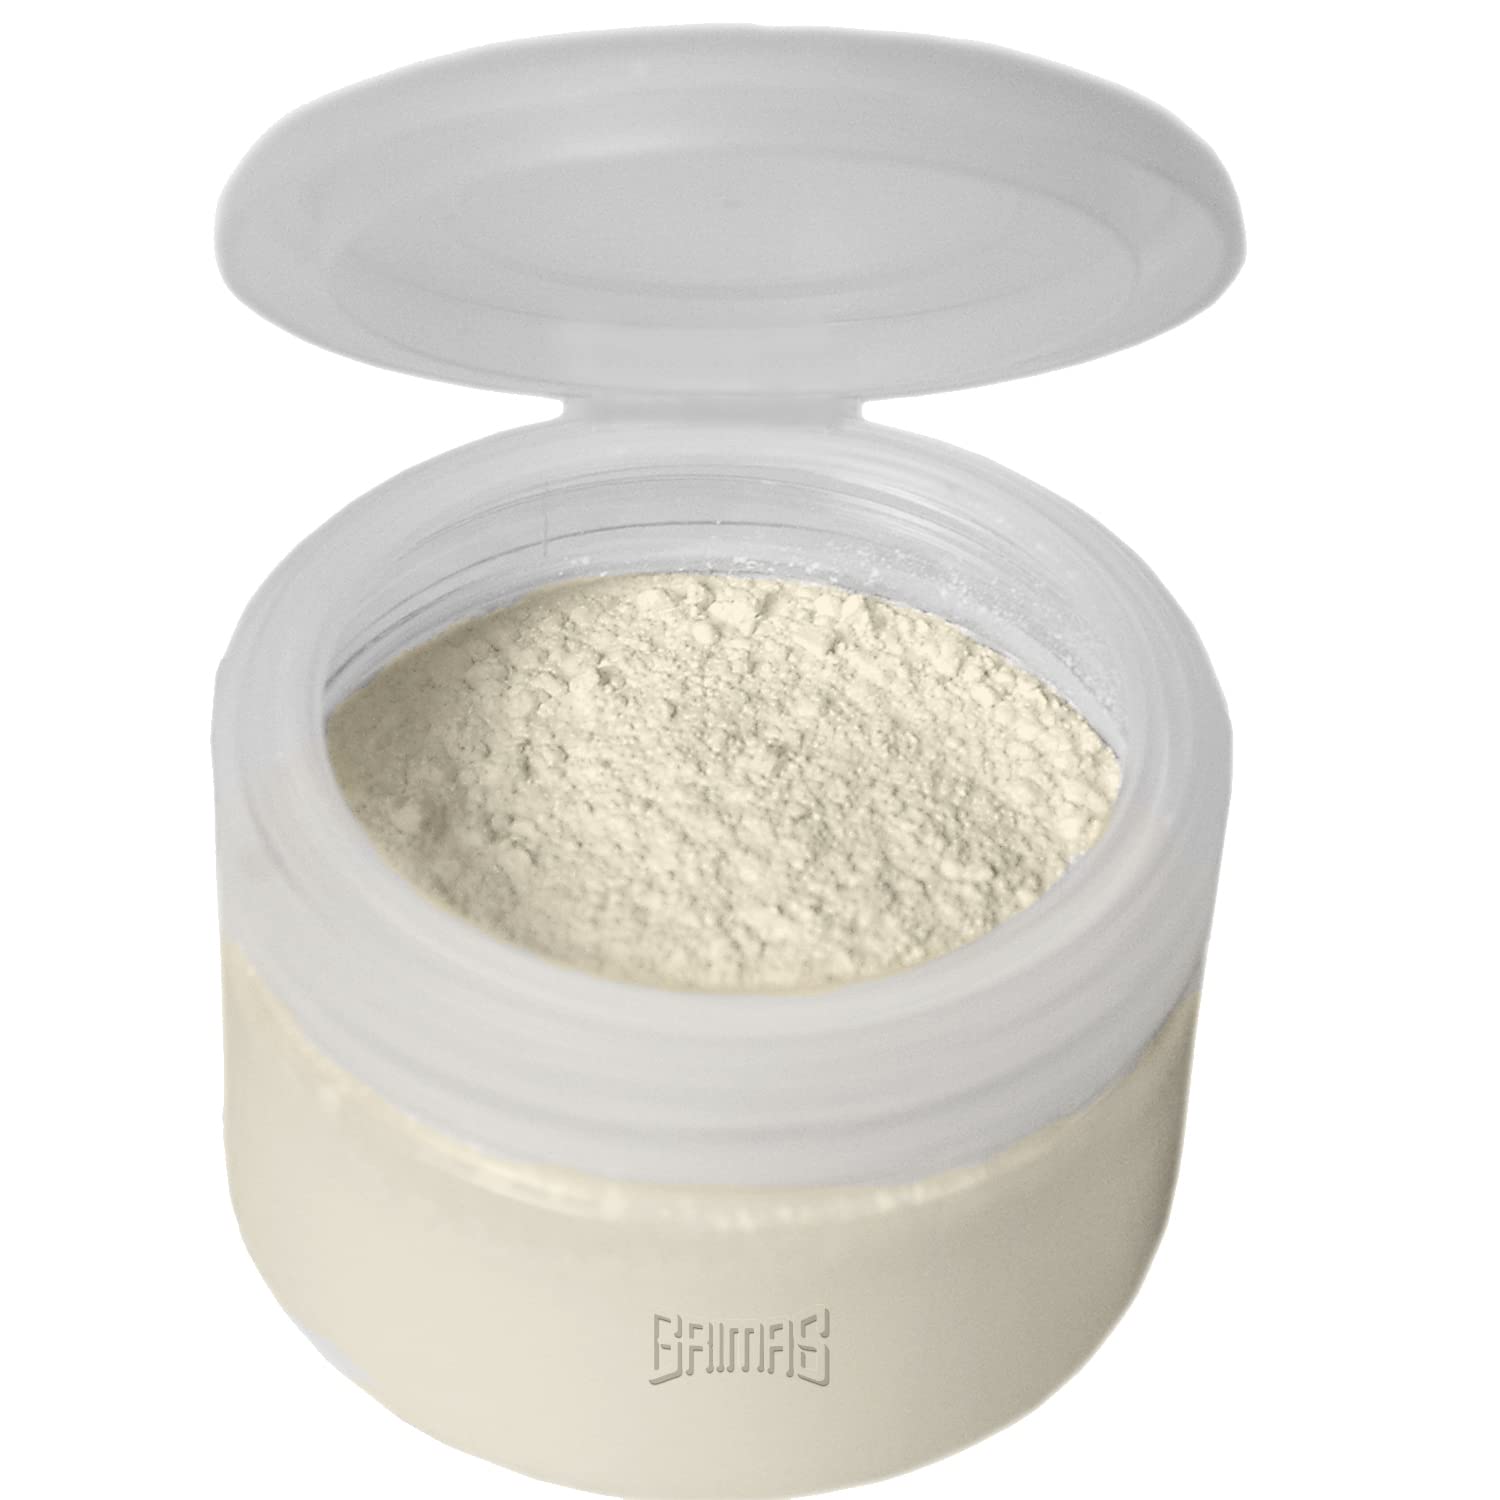 Grimas Makeup Powder 150g Professional Clear Fixing Powder Ultra Matte Ideal for Dark Skin Foundation, Cream, Camouflage and More, Unscented, Vegan